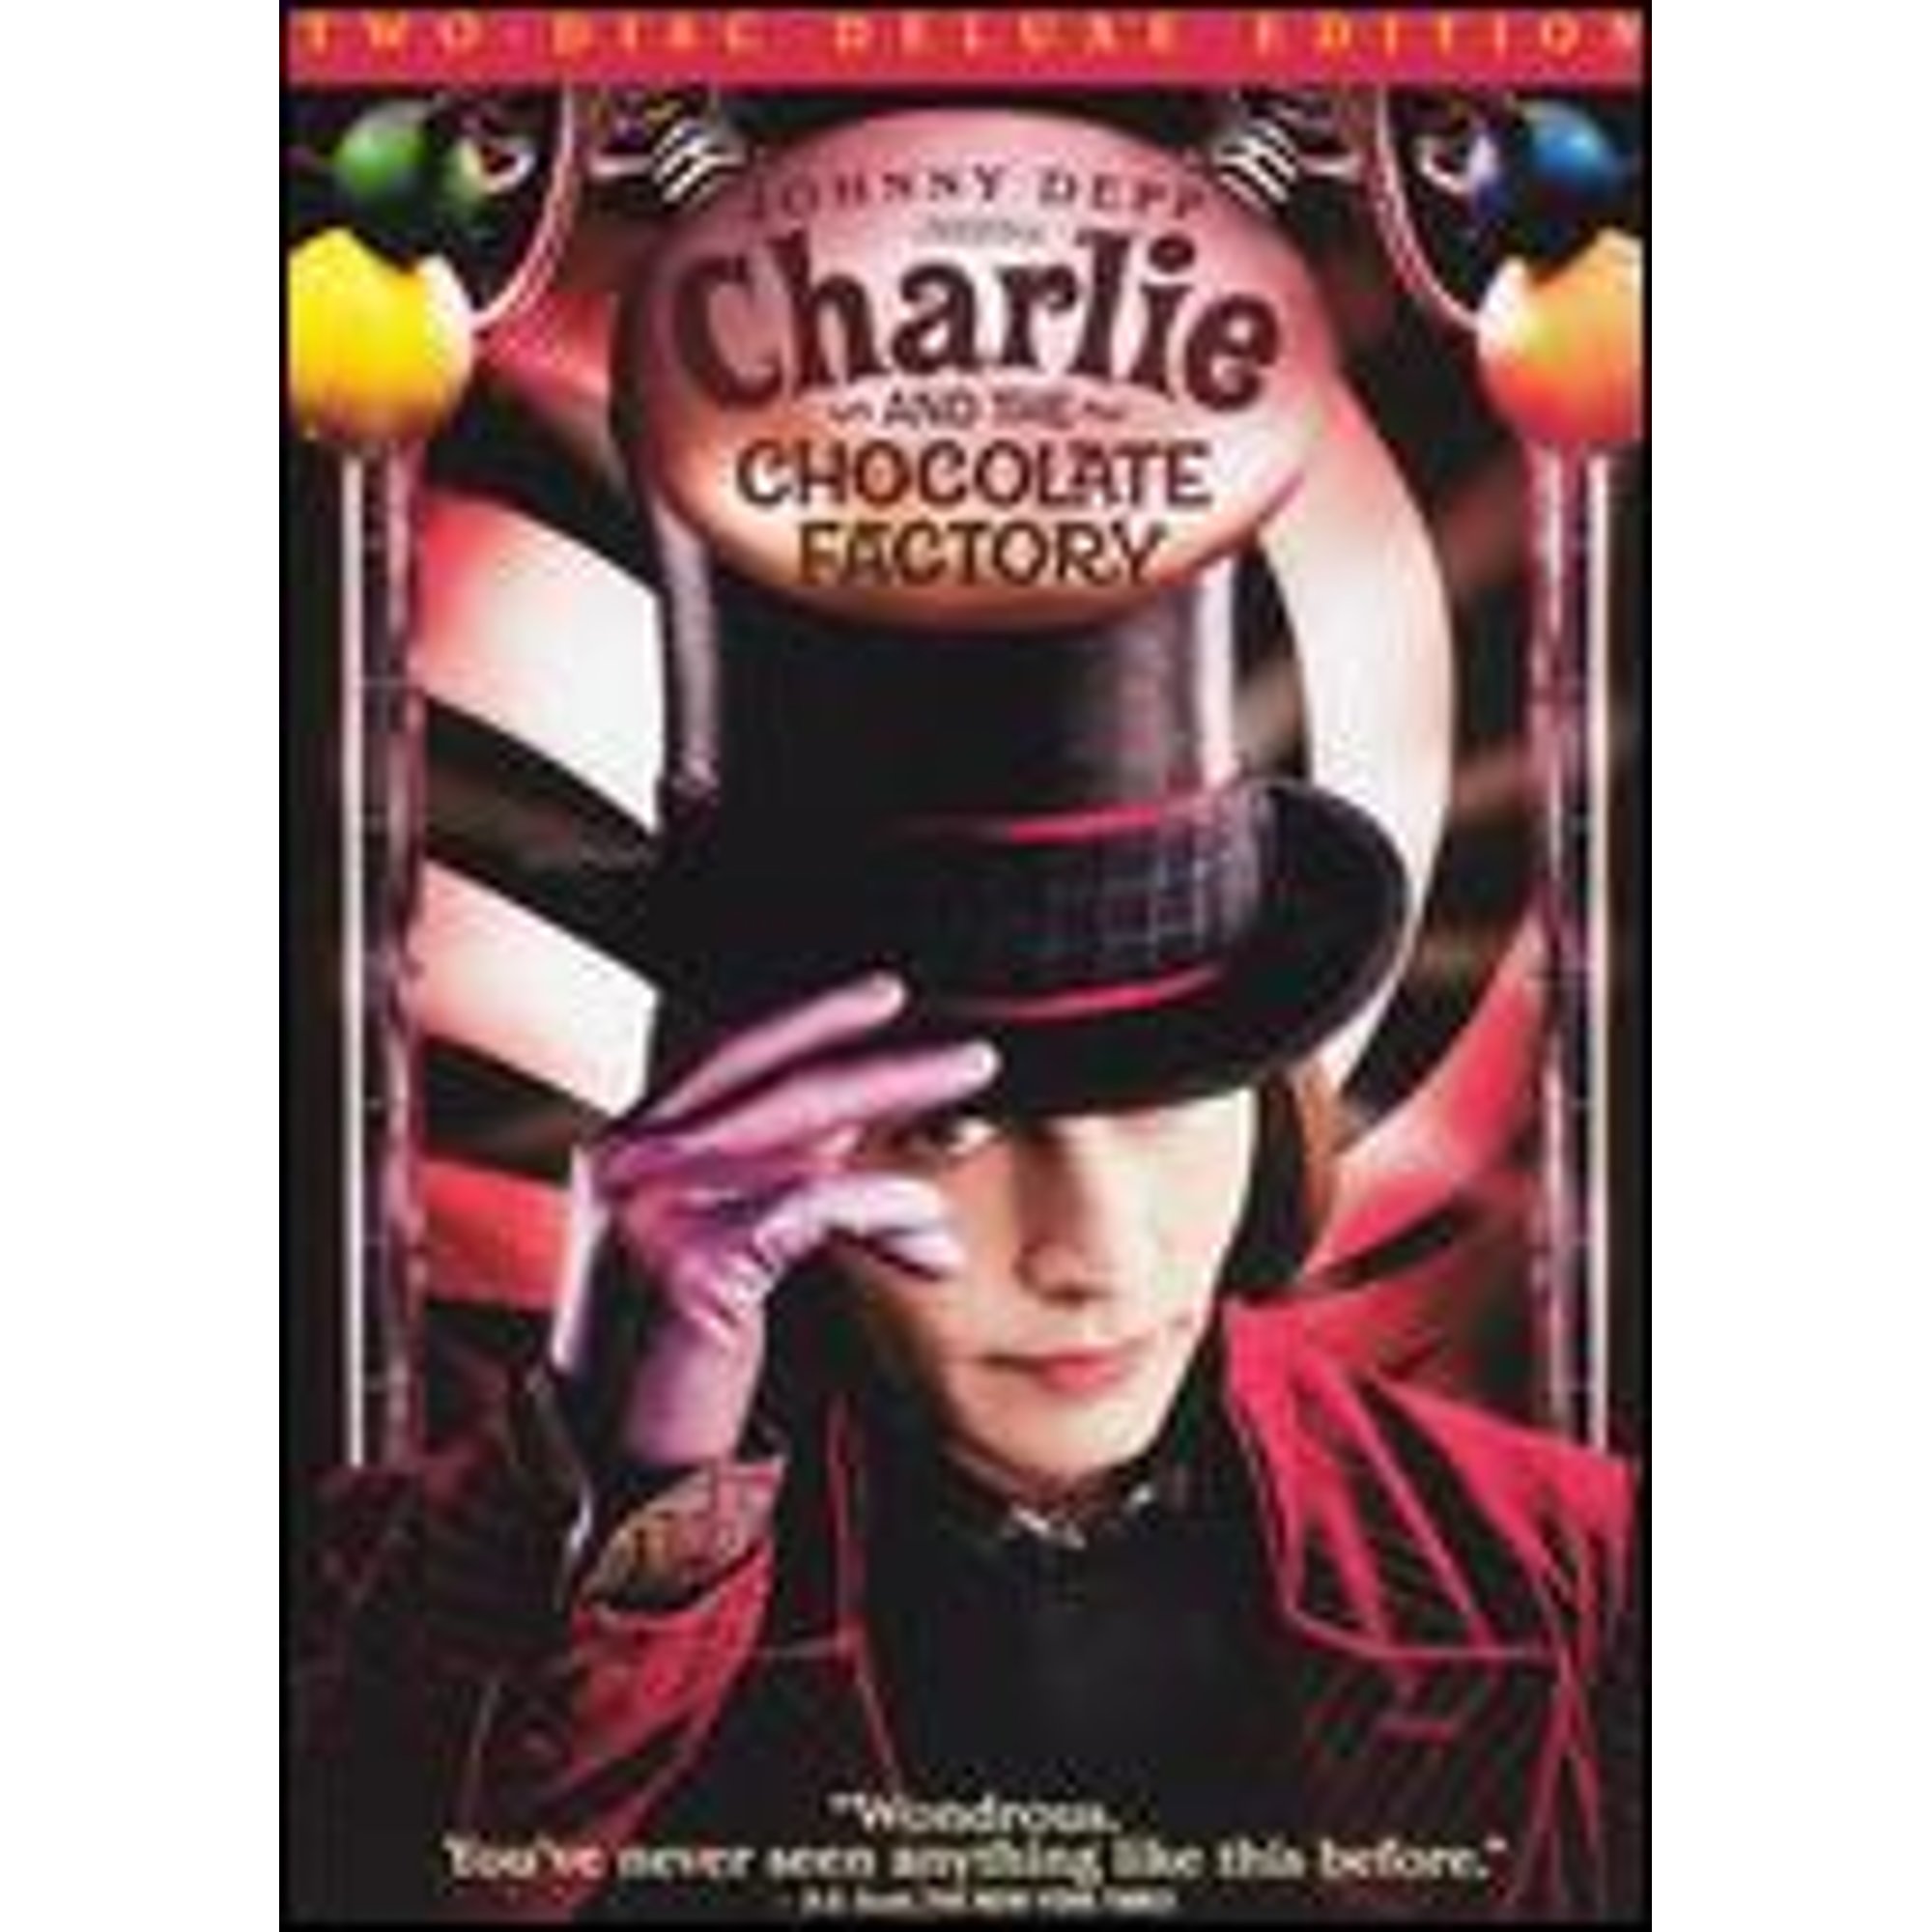 Pre-Owned　(DVD　[2　Discs]　[WS]　Charlie　Factory　Tim　the　and　Chocolate　by　0012569743151)　directed　Burton